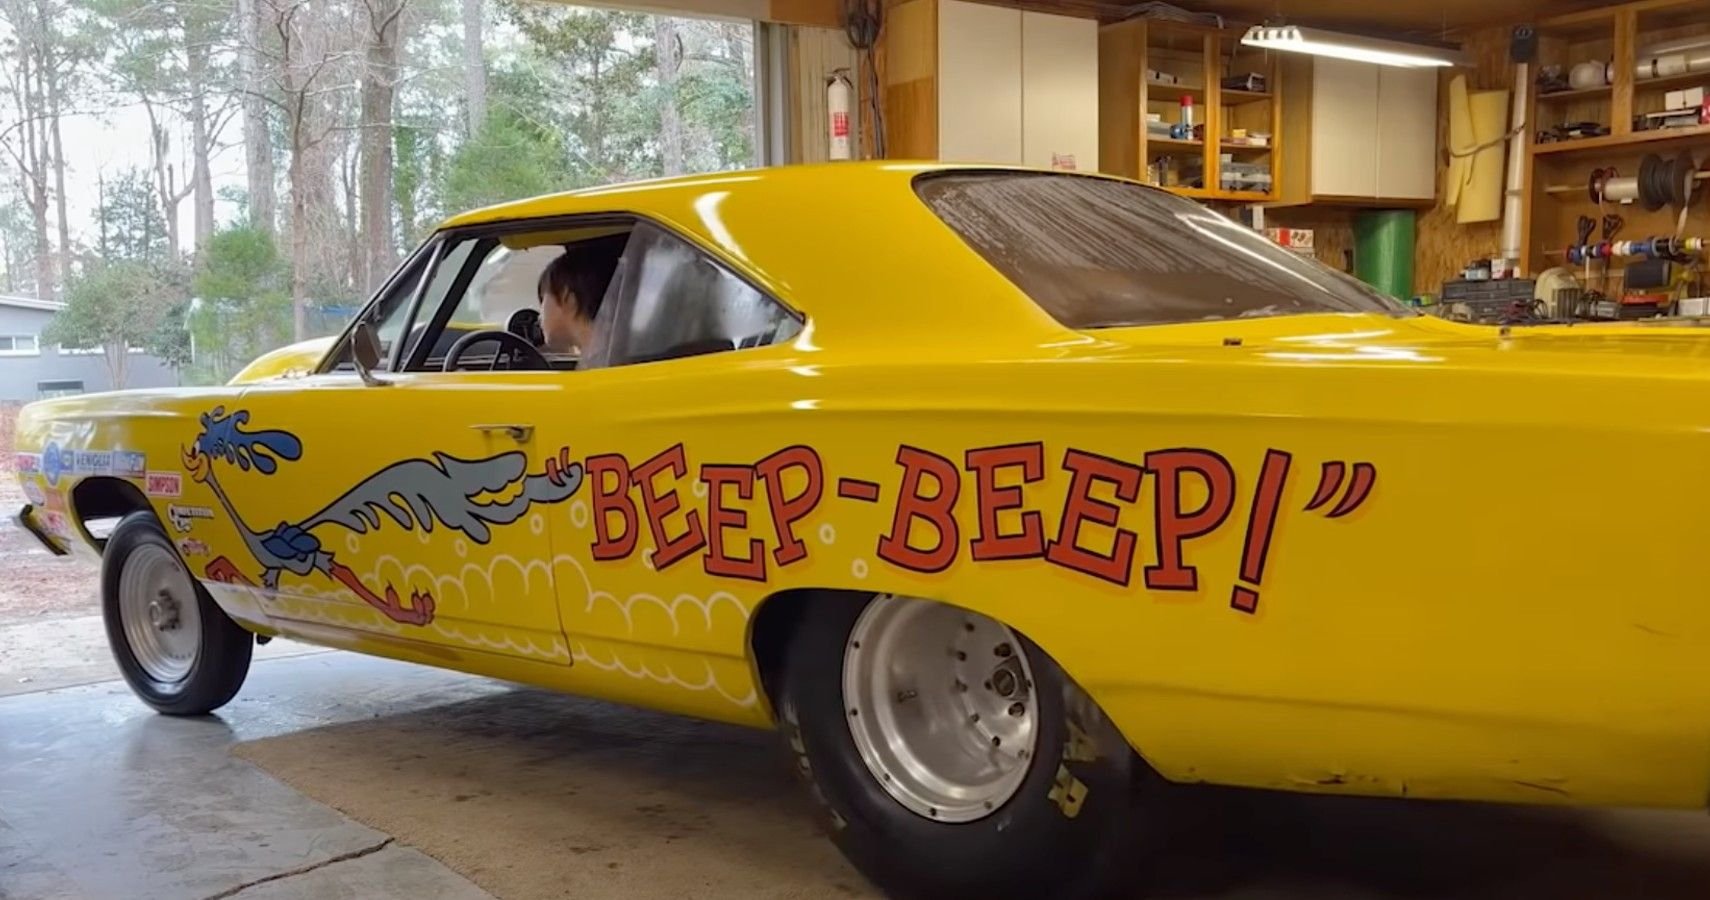 Beep Beep: Let's Take A Look At This Rescued 1969 Plymouth Roadrunner